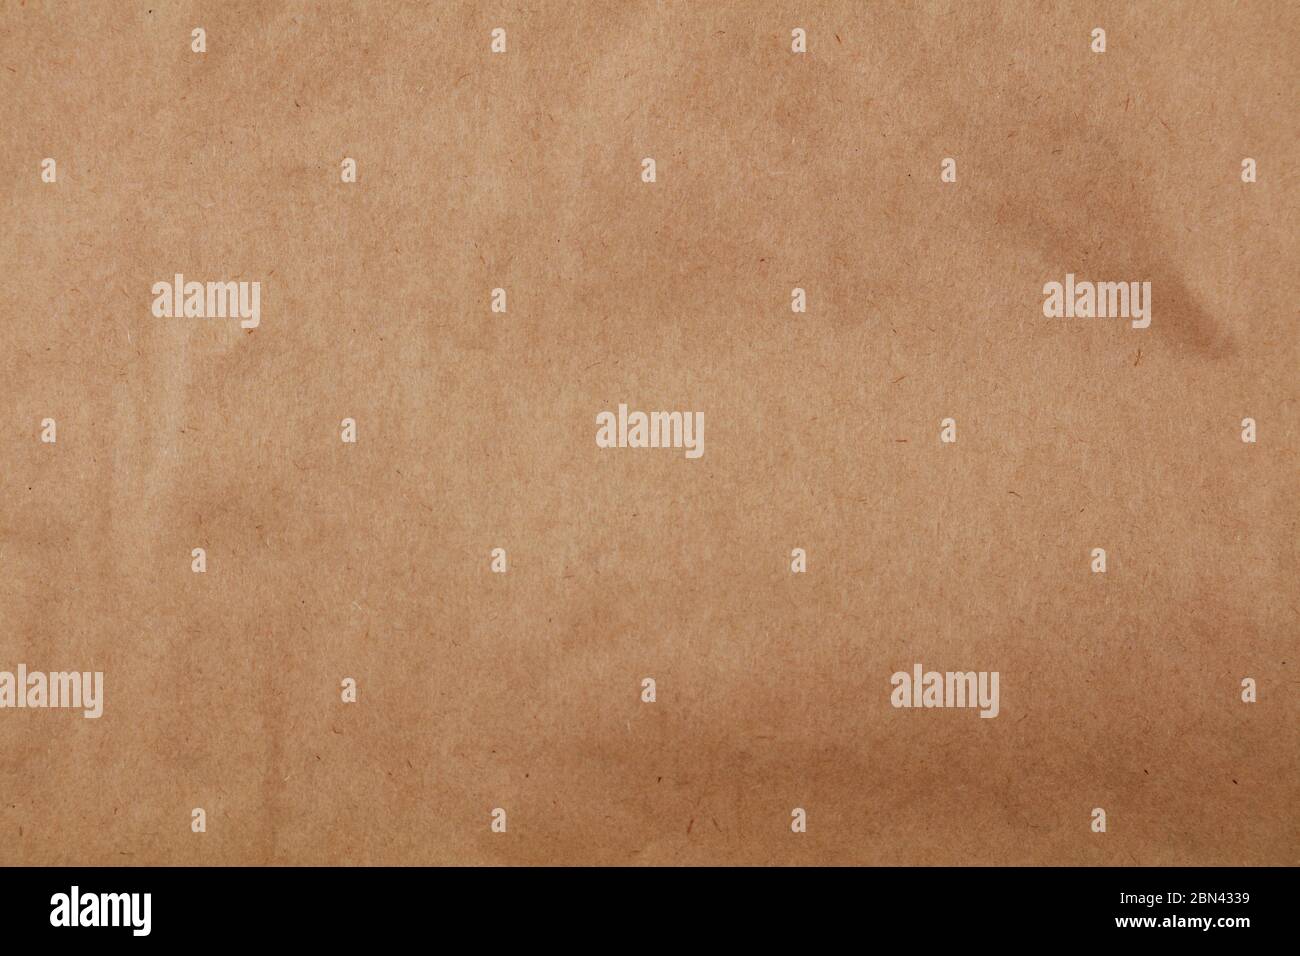 Closeup of brown paper texture background Stock Photo